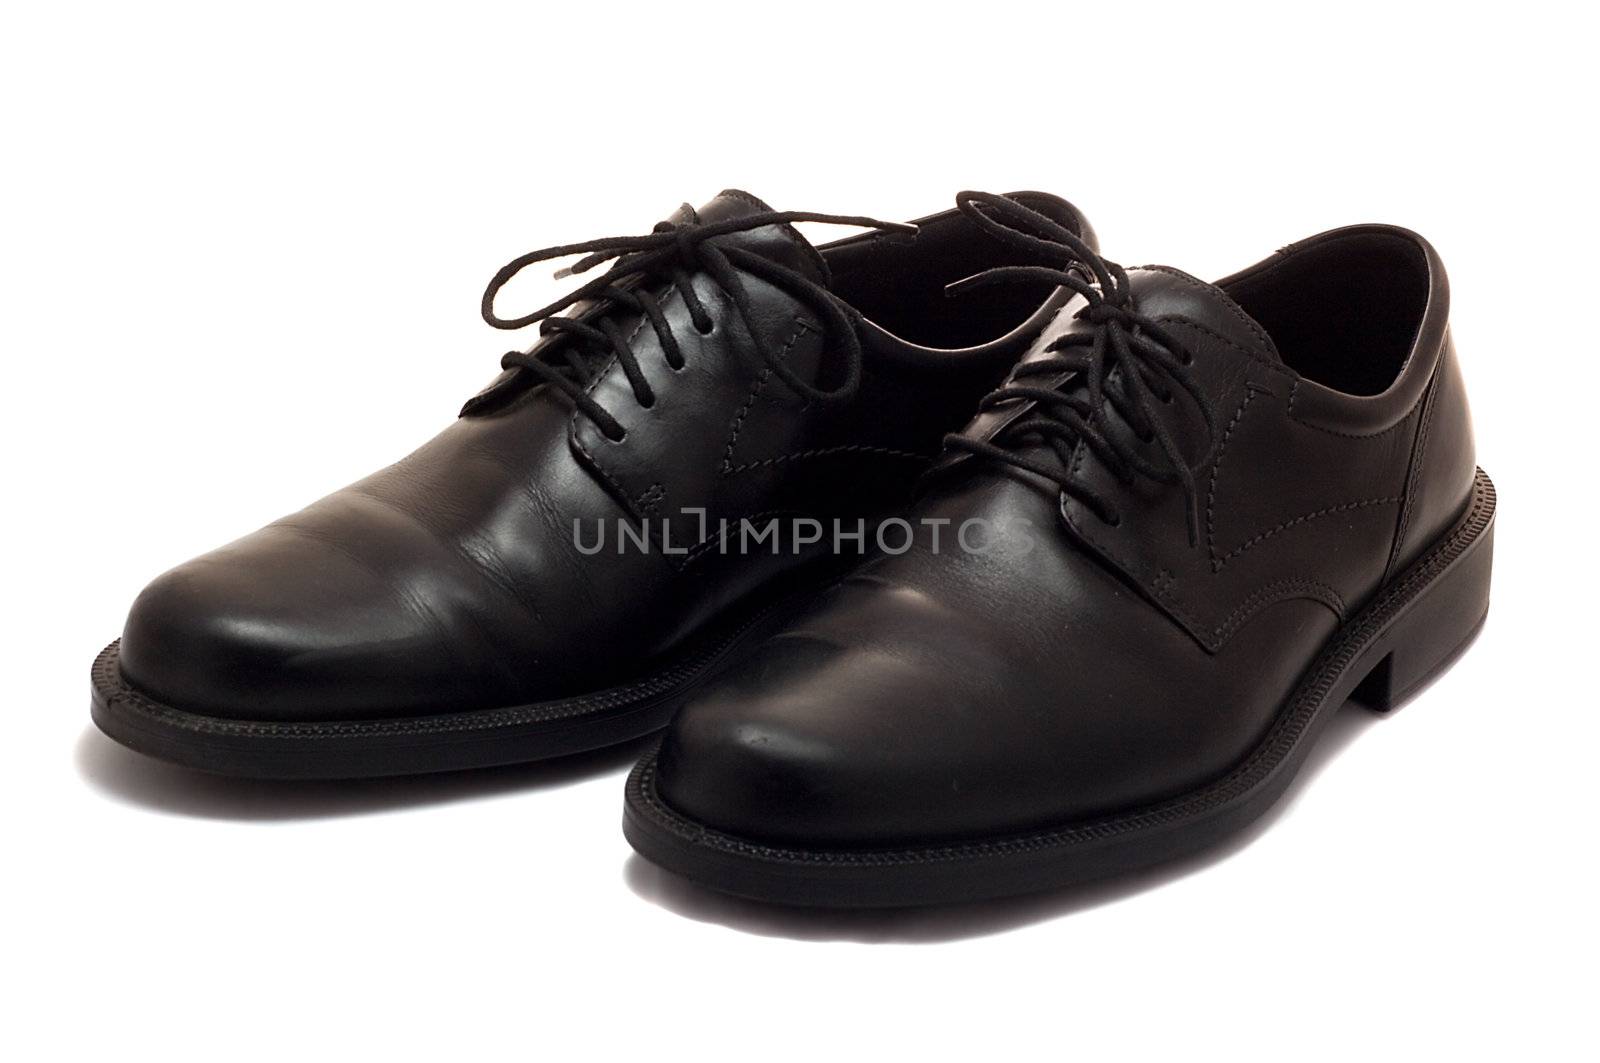 man's black business shoes, isolated on white background